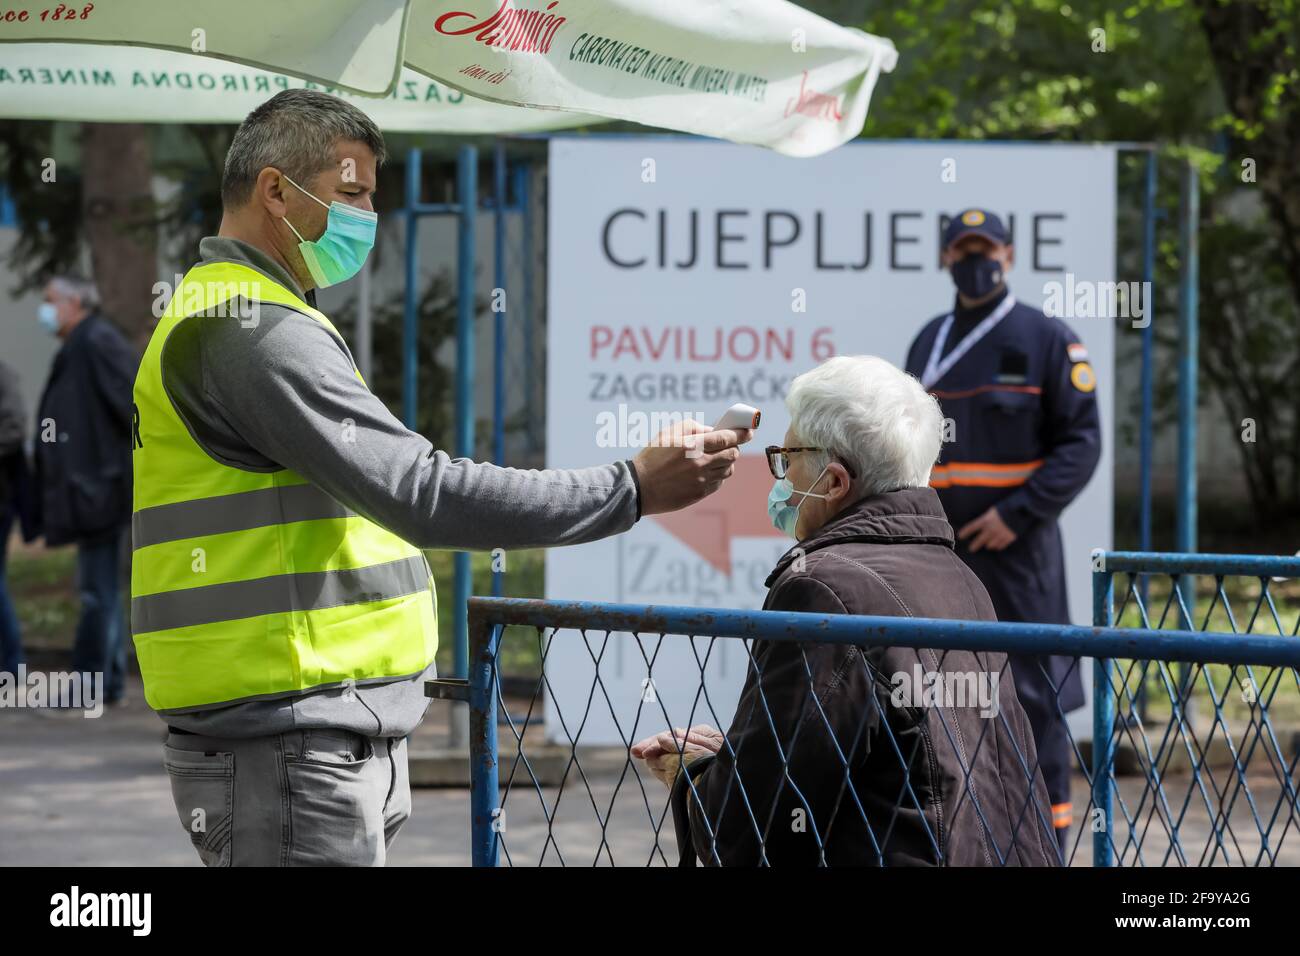 Zagreb, Croatia. 21th April 2021. Organized mass vaccination of citizens with the Pfizer vaccine  against Covid 19 virus in pavilion 6 of the Zagreb Fair. Covid guards measure the temperature of citizens before vaccination. Stock Photo